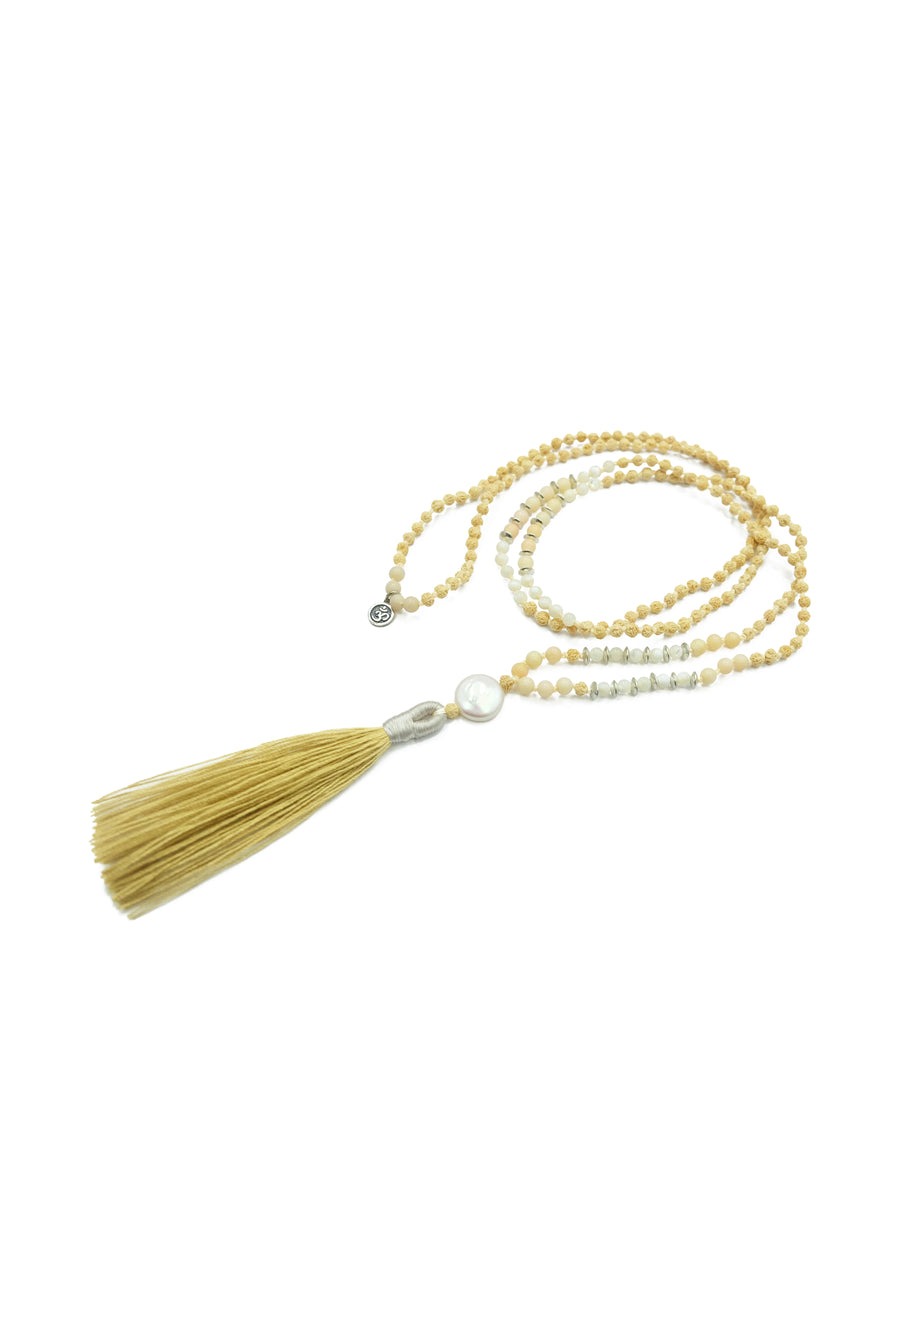 Uluwatu Moon Mala featuring pearls, corals, moonstone, and elegant sterling silver accents by www.balimalas.com.